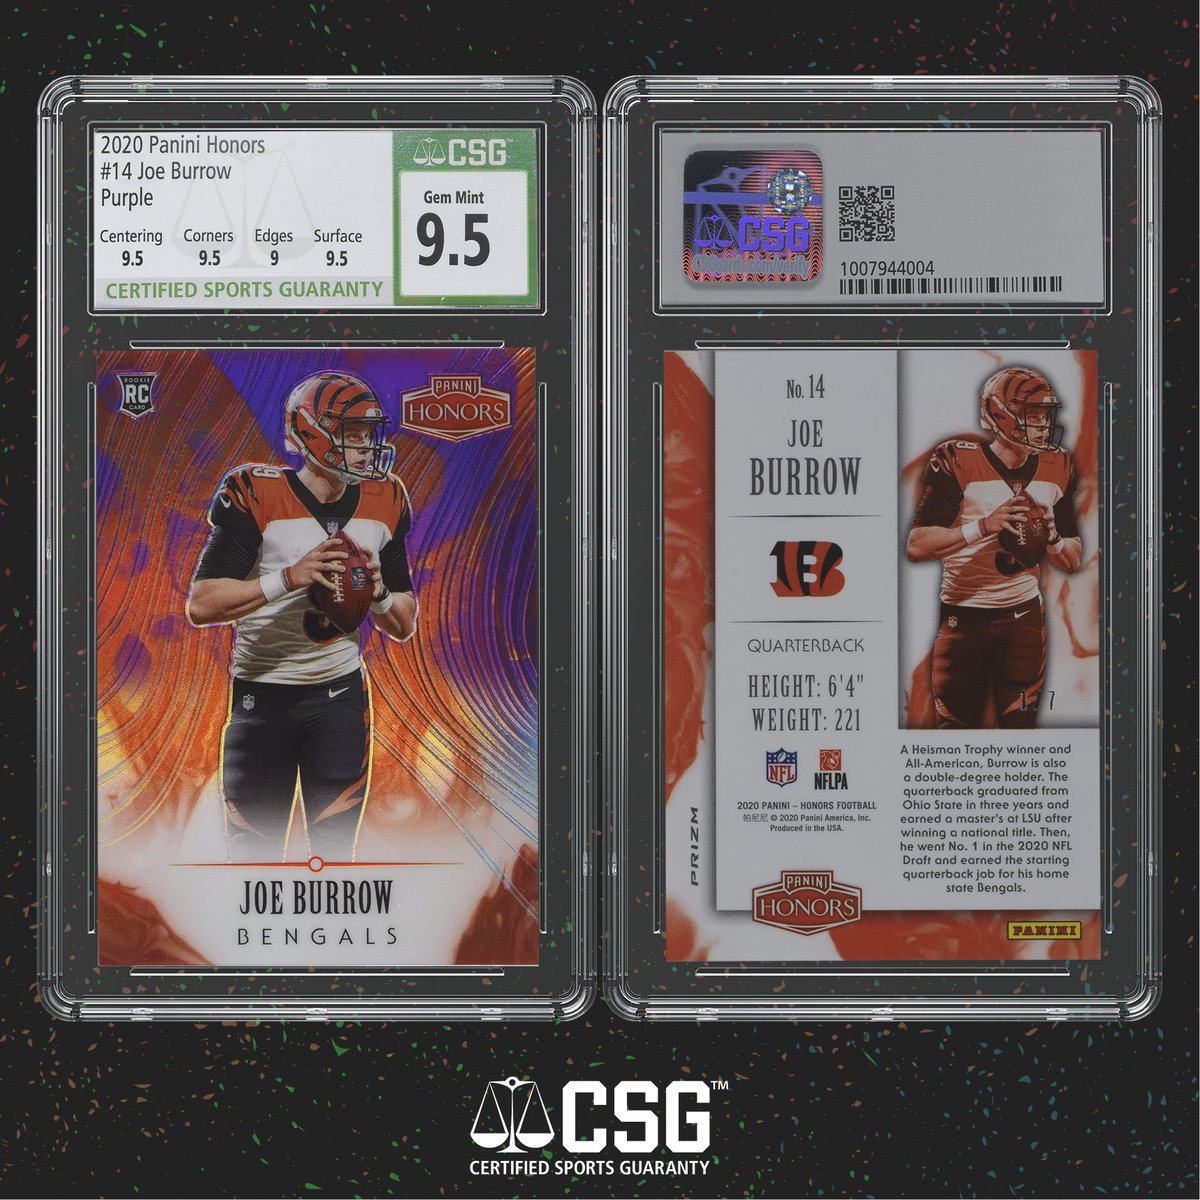 Today’s CSG Card of the Day features the number 1 pick in the 2020 NFL Draft, Joe Burrow.  We’re highlighting the Cincinnati Bengals QB in this 2020 Panini Honors card graded CSG 9.5. The Bengals look to pick up a big road win today in Denver and keep their play-off hopes alive. https://t.co/btOsfKC736